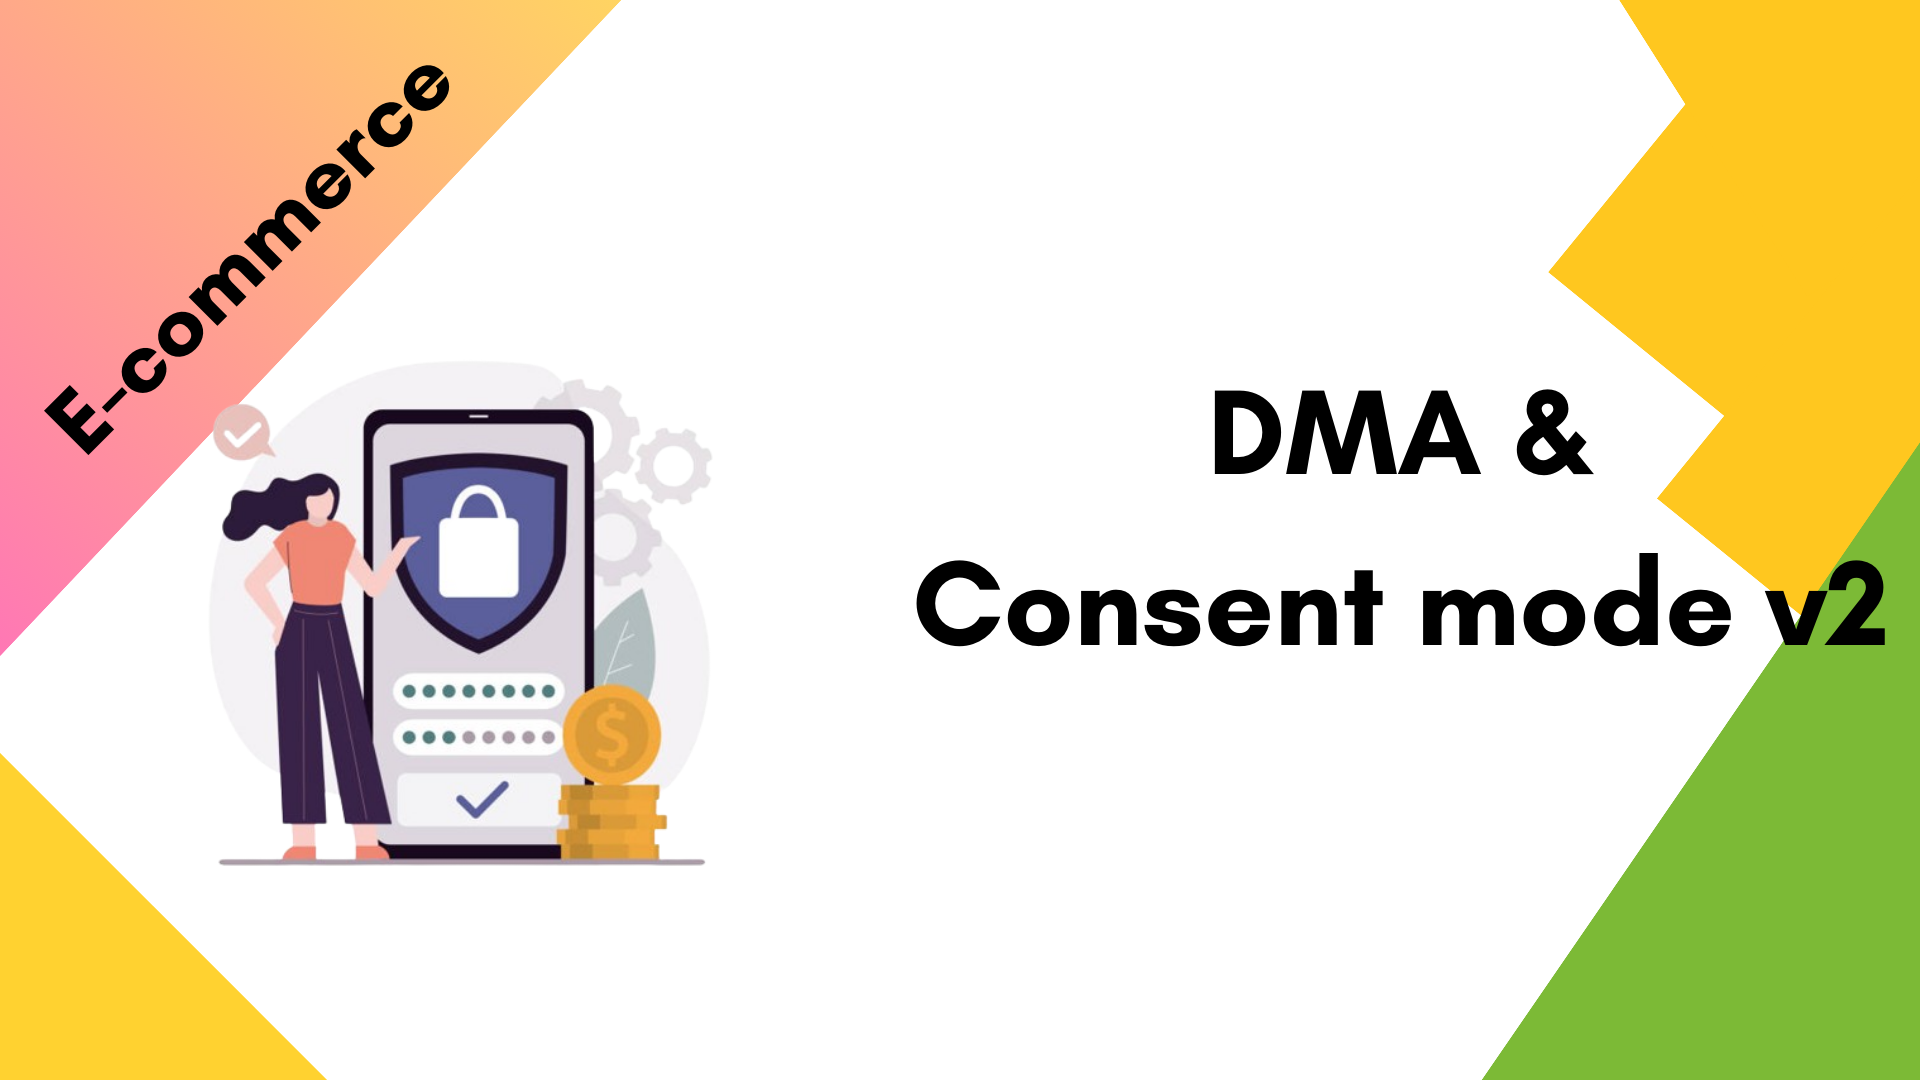 What DMA & Consent mode v2 Mean for Your Business